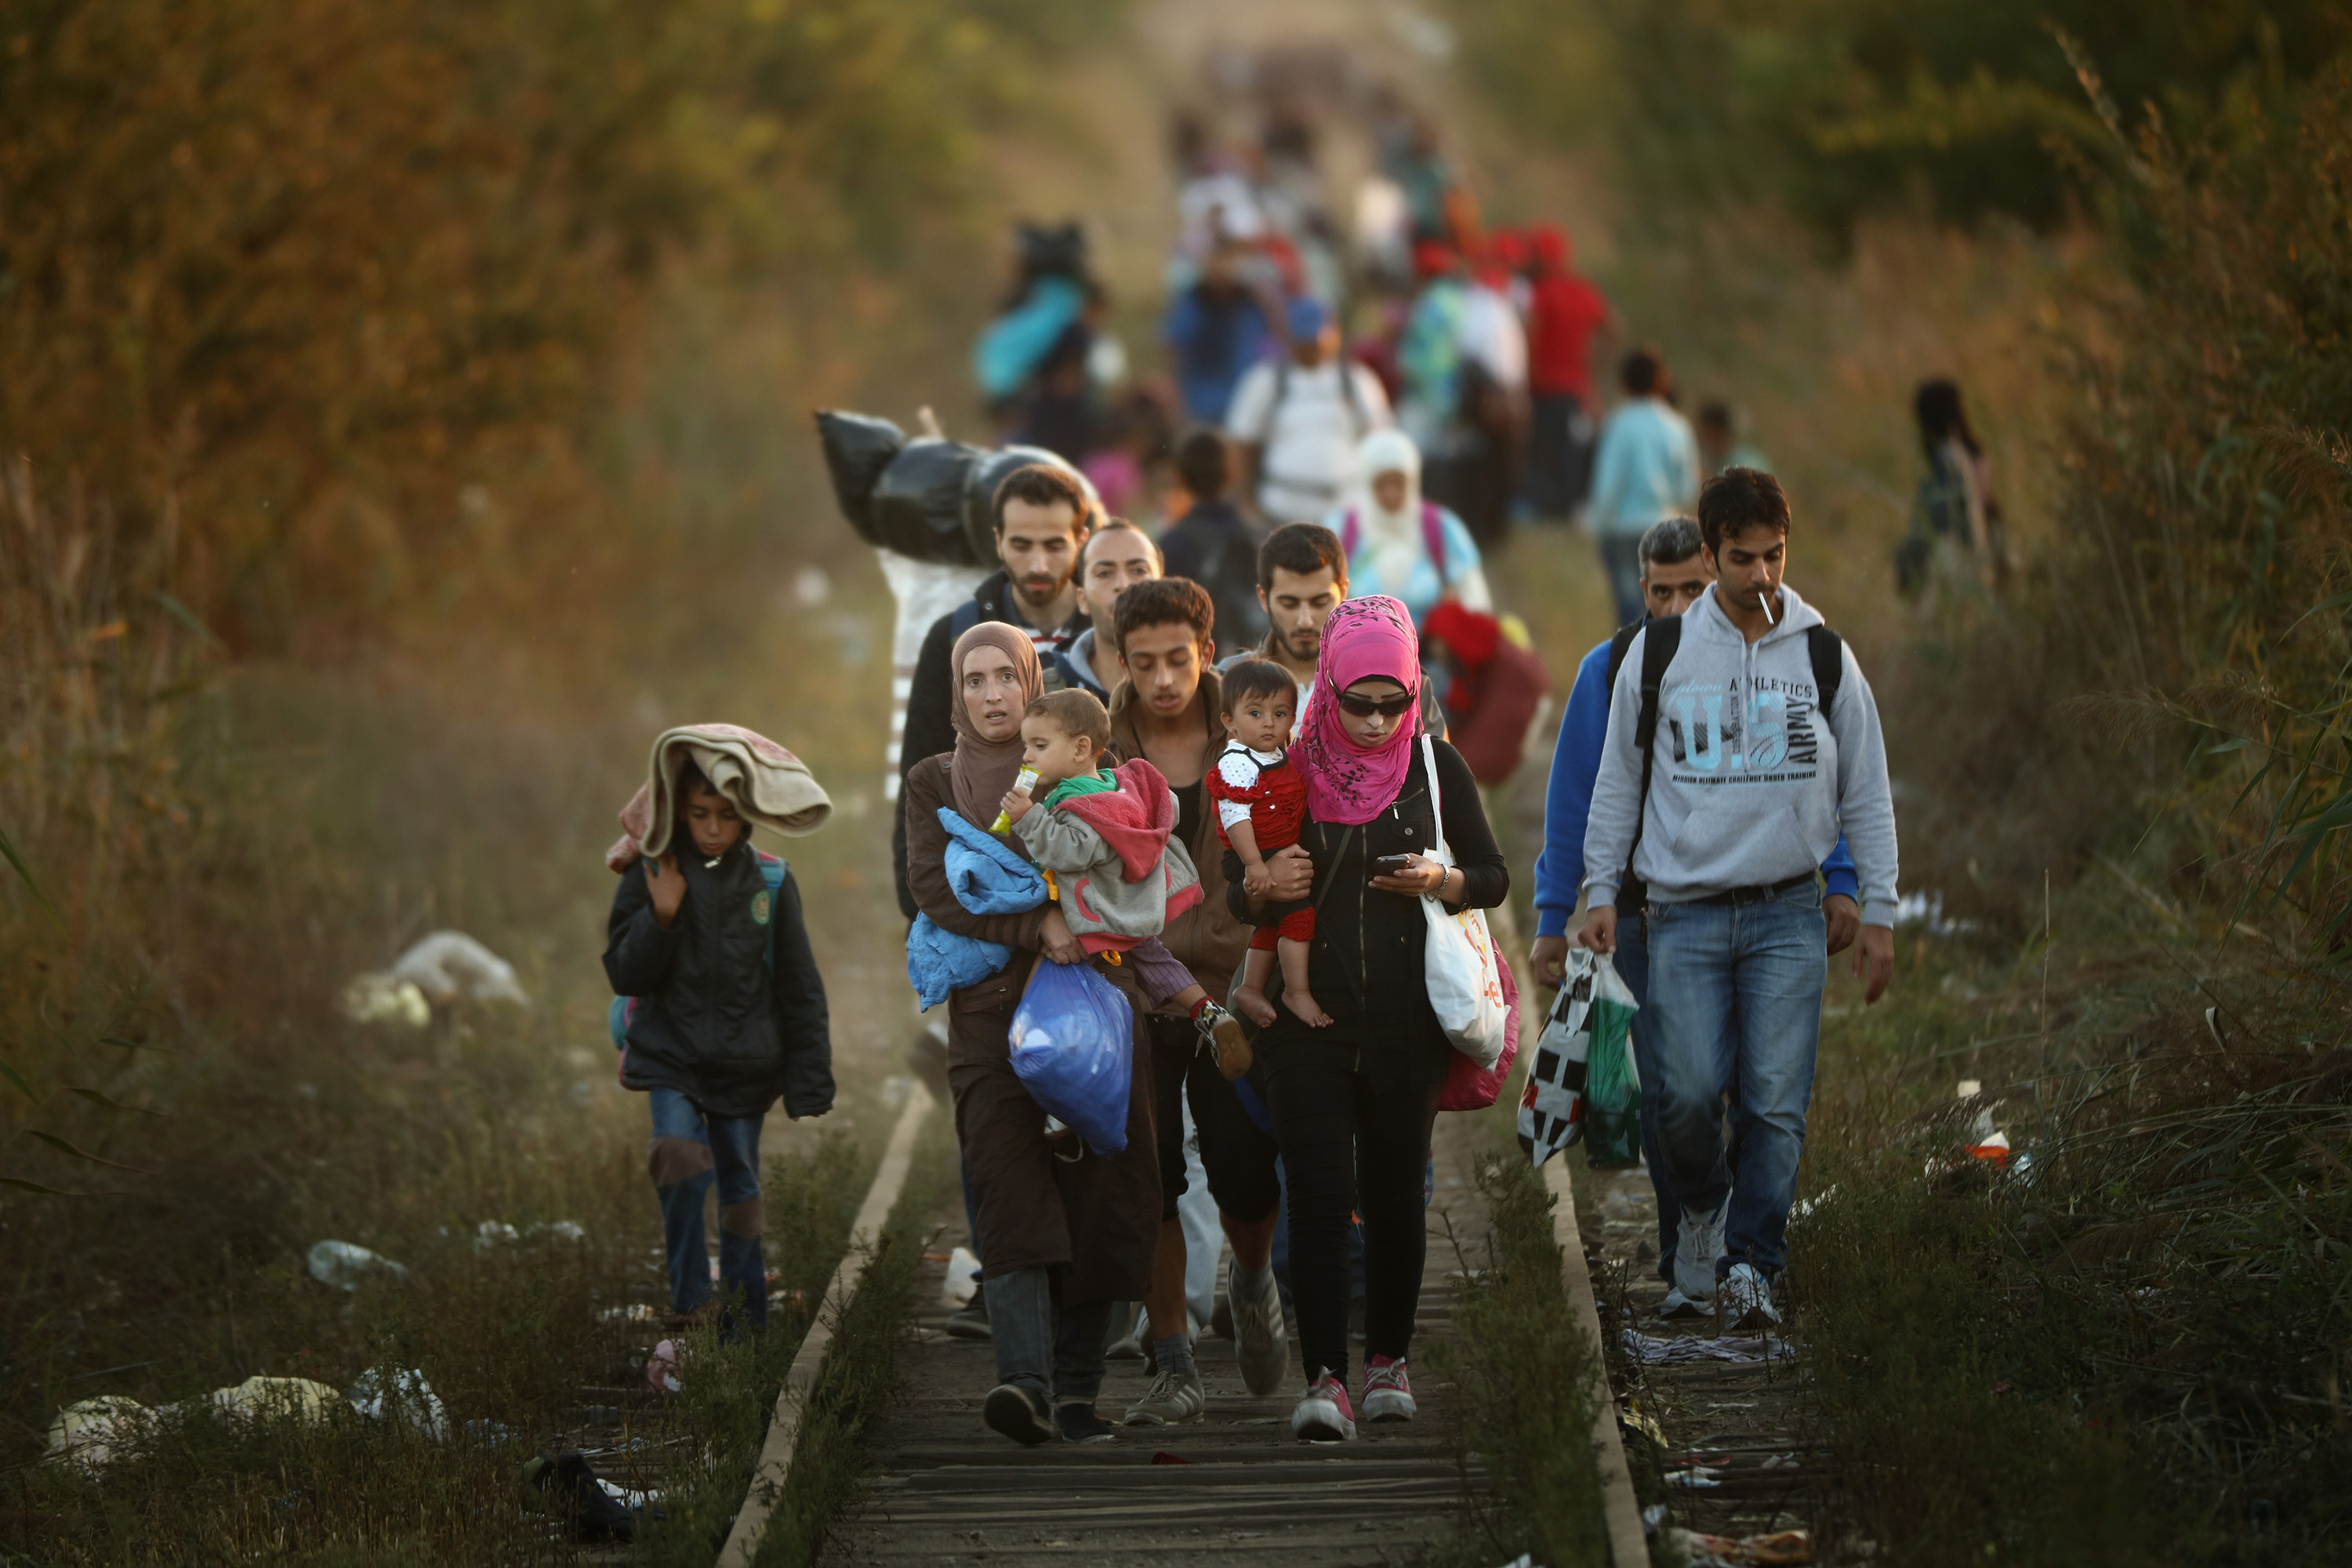 SUBOTICA, SERBIA - SEPTEMBER 09:  Migrants make their way through Serbia, near the town of Subotica, towards a break in the steel and razor fence erected on the  border by the Hungarian government on September 9, 2015 in Subotica, Serbia. Thousands of migrants have funnelled their way across country to the small gap in the steel fence unopposed by the authorities.  Since the beginning of 2015 the number of migrants using the so-called 'Balkans route' has exploded with migrants arriving in Greece from Turkey and then travelling on through Macedonia and Serbia before entering the EU via Hungary. The number of people leaving their homes in war torn countries such as Syria, marks the largest migration of people since World War II.  (Photo by Christopher Furlong/Getty Images)